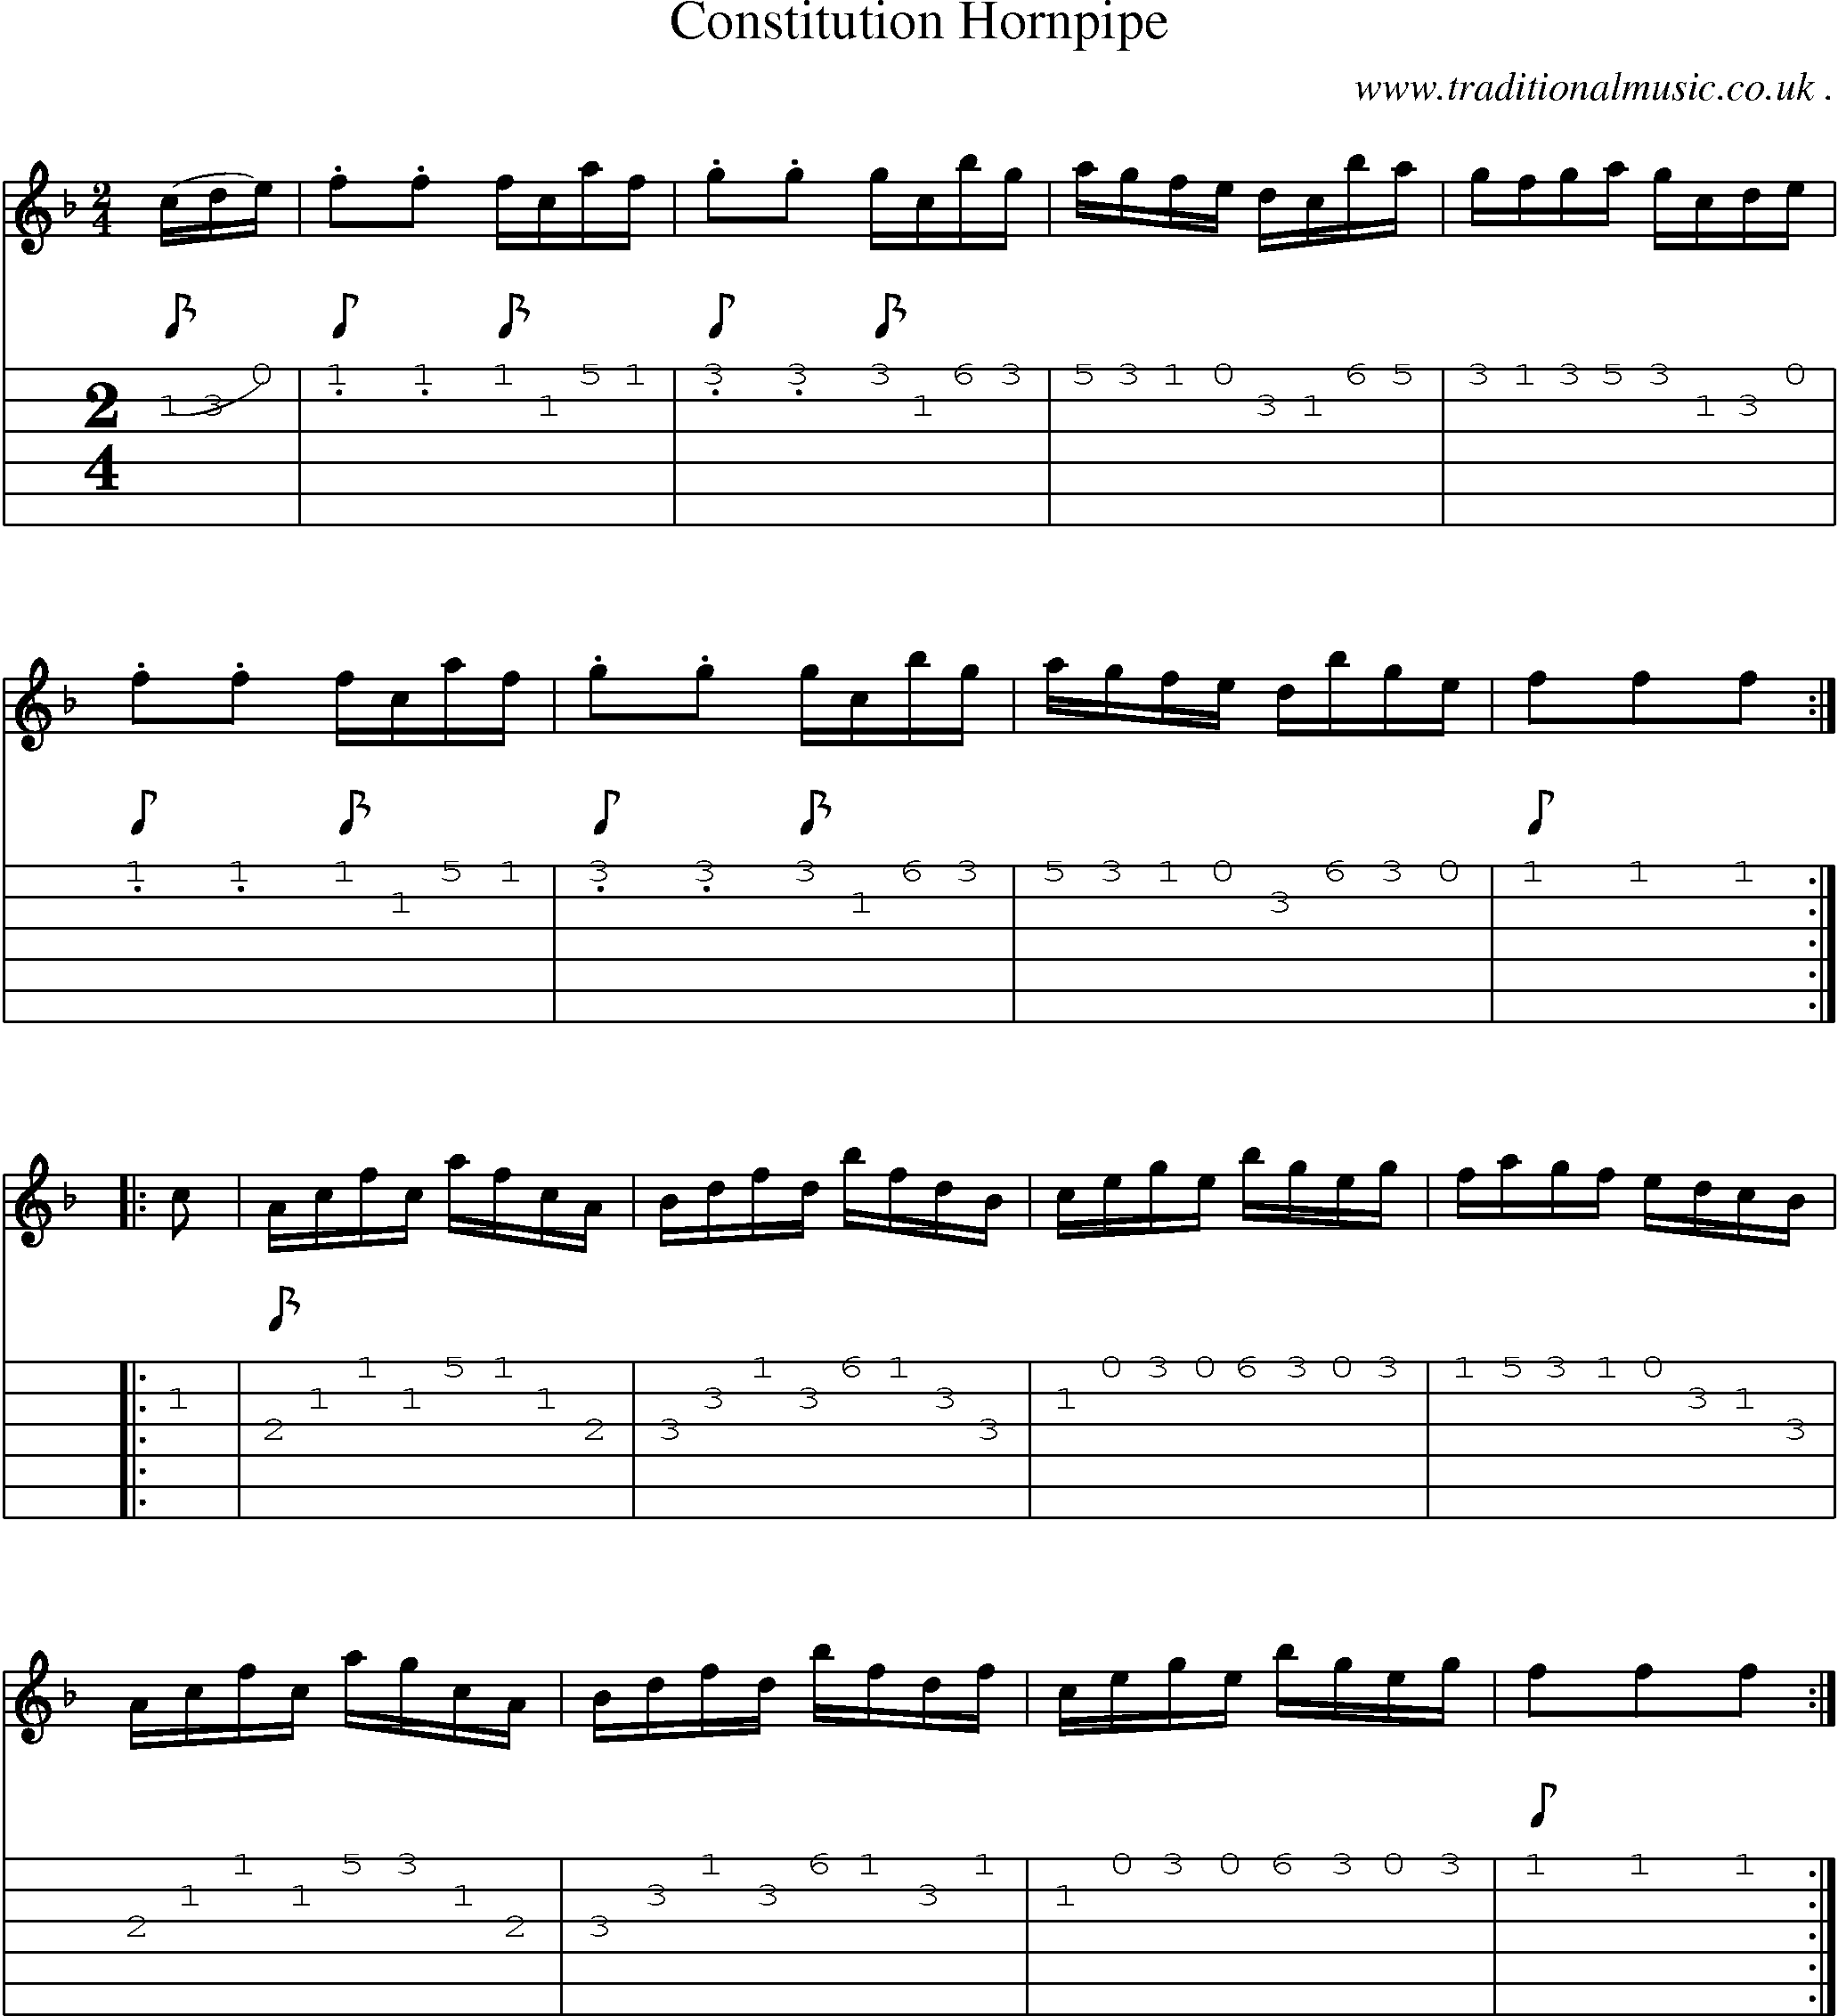 Sheet-Music and Guitar Tabs for Constitution Hornpipe